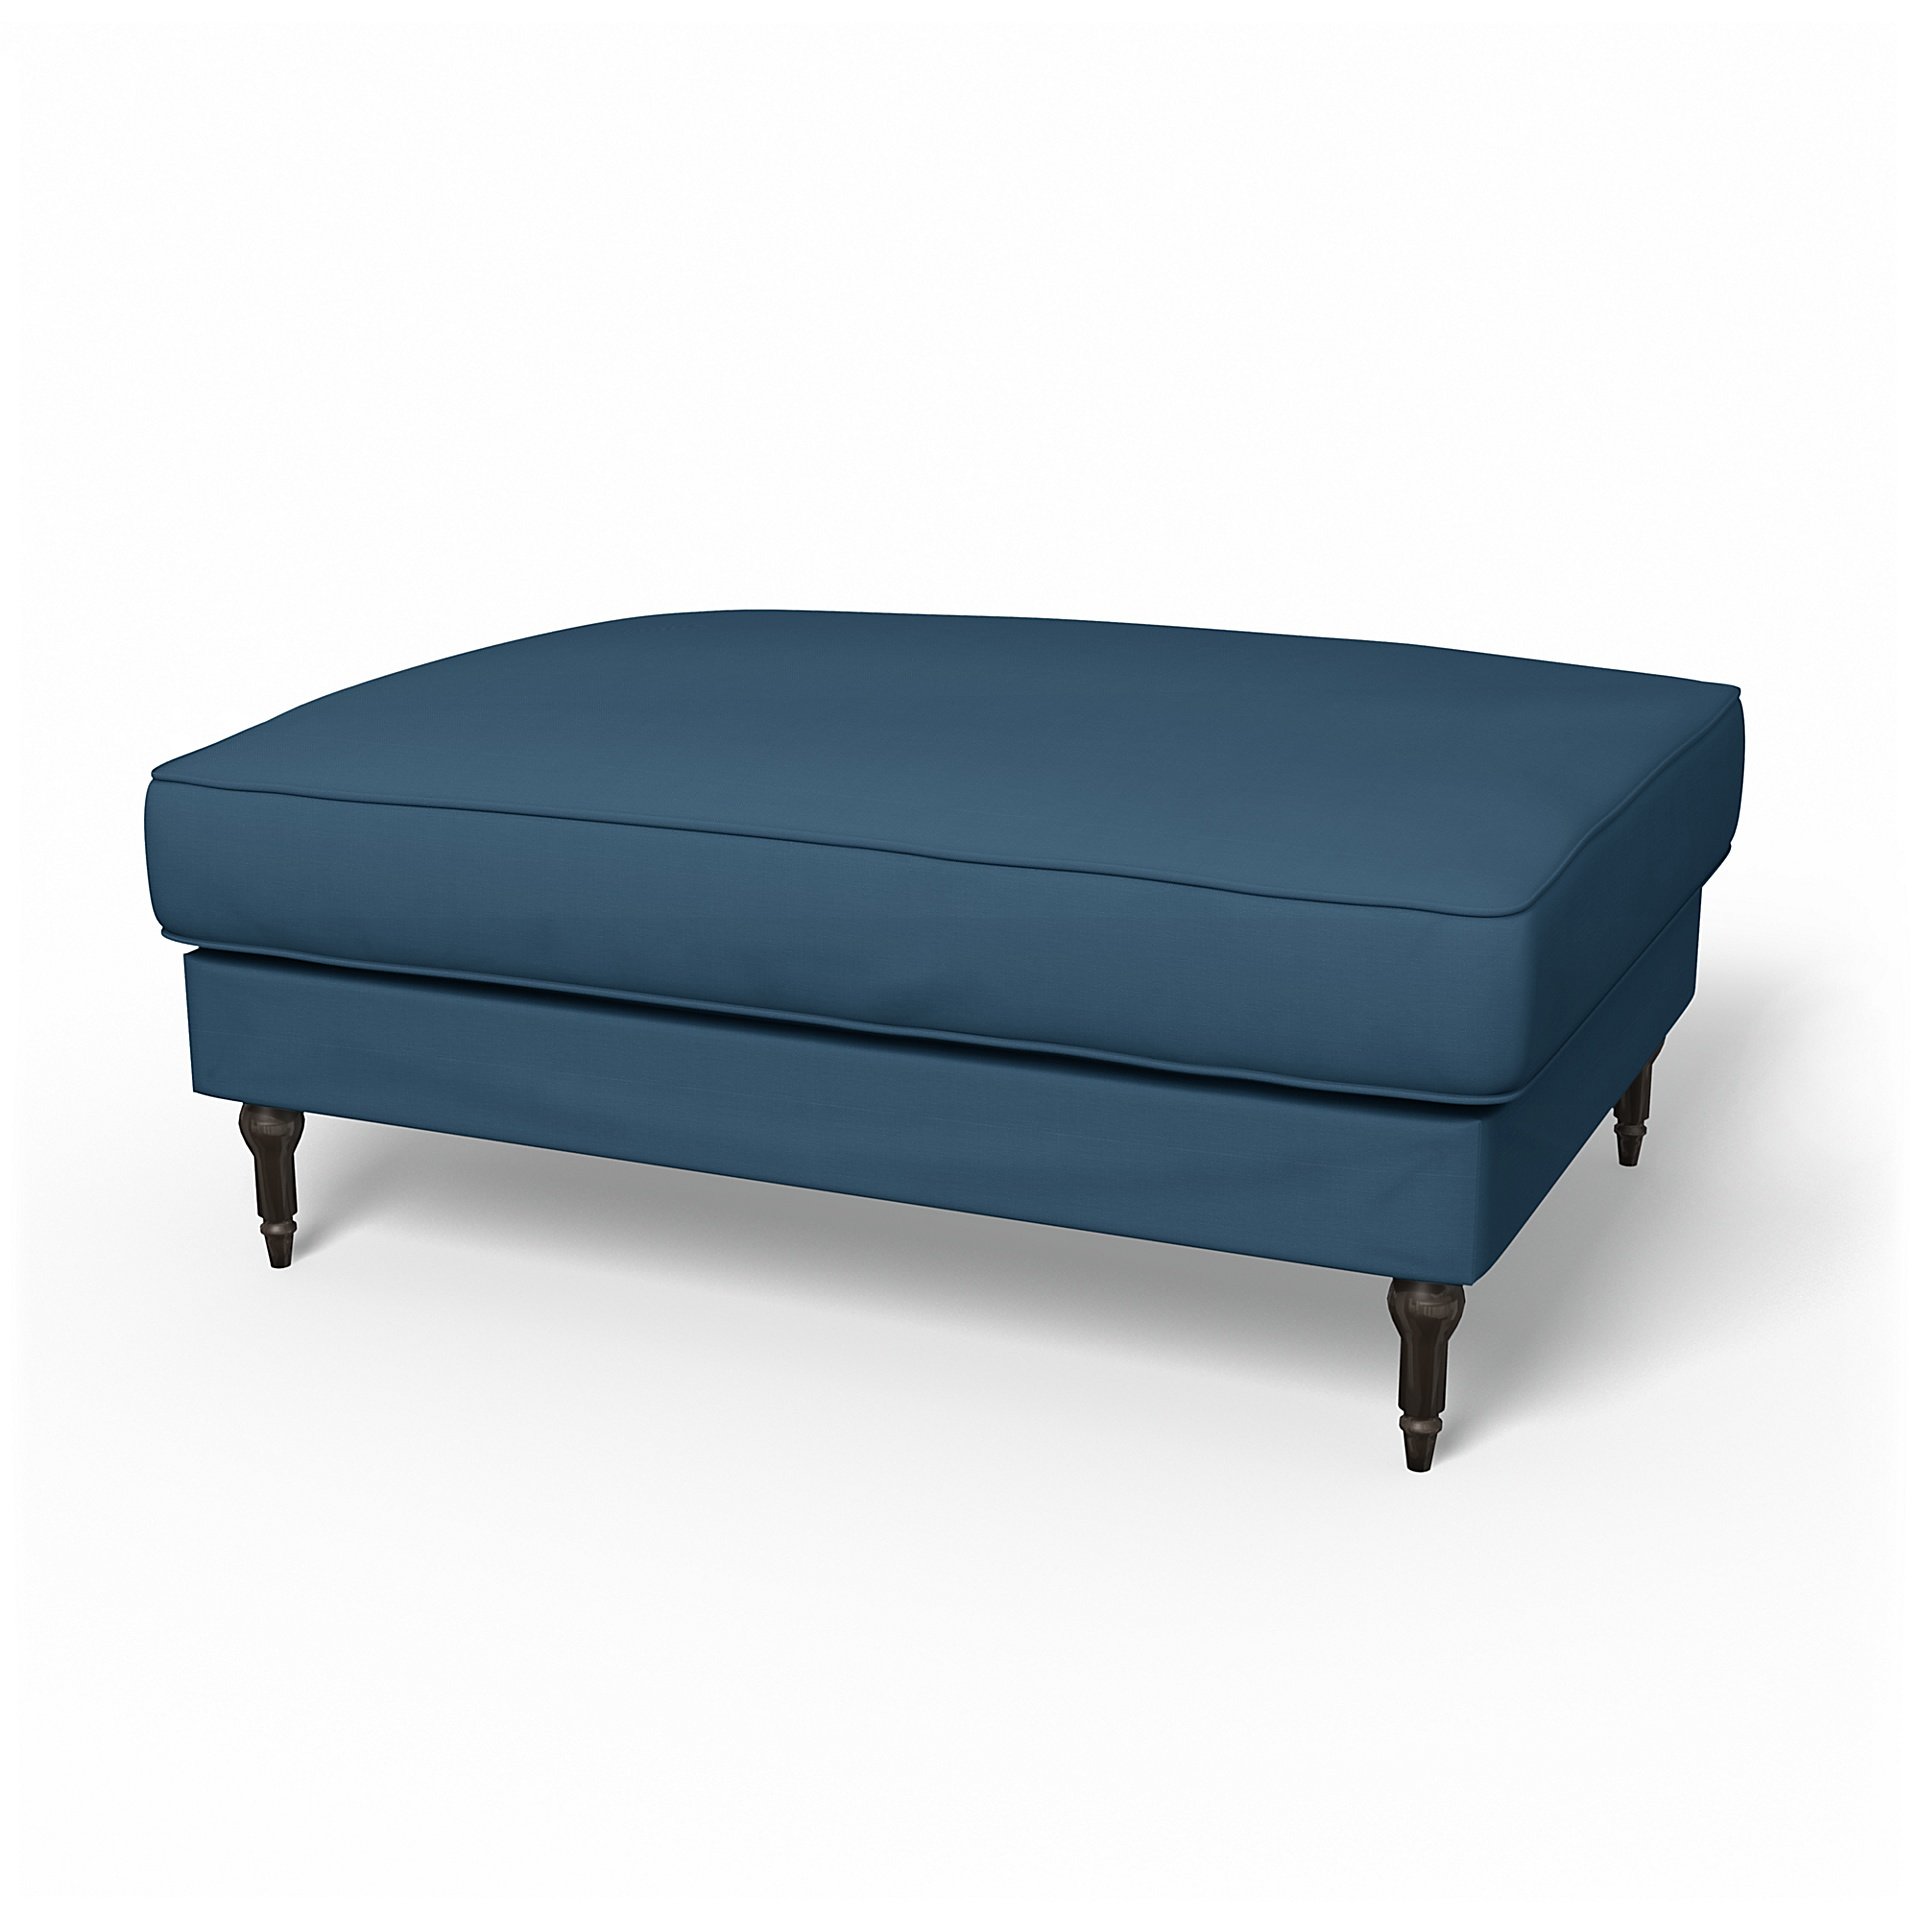 IKEA - Stocksund Footstool Cover, Real Teal, Cotton - Bemz